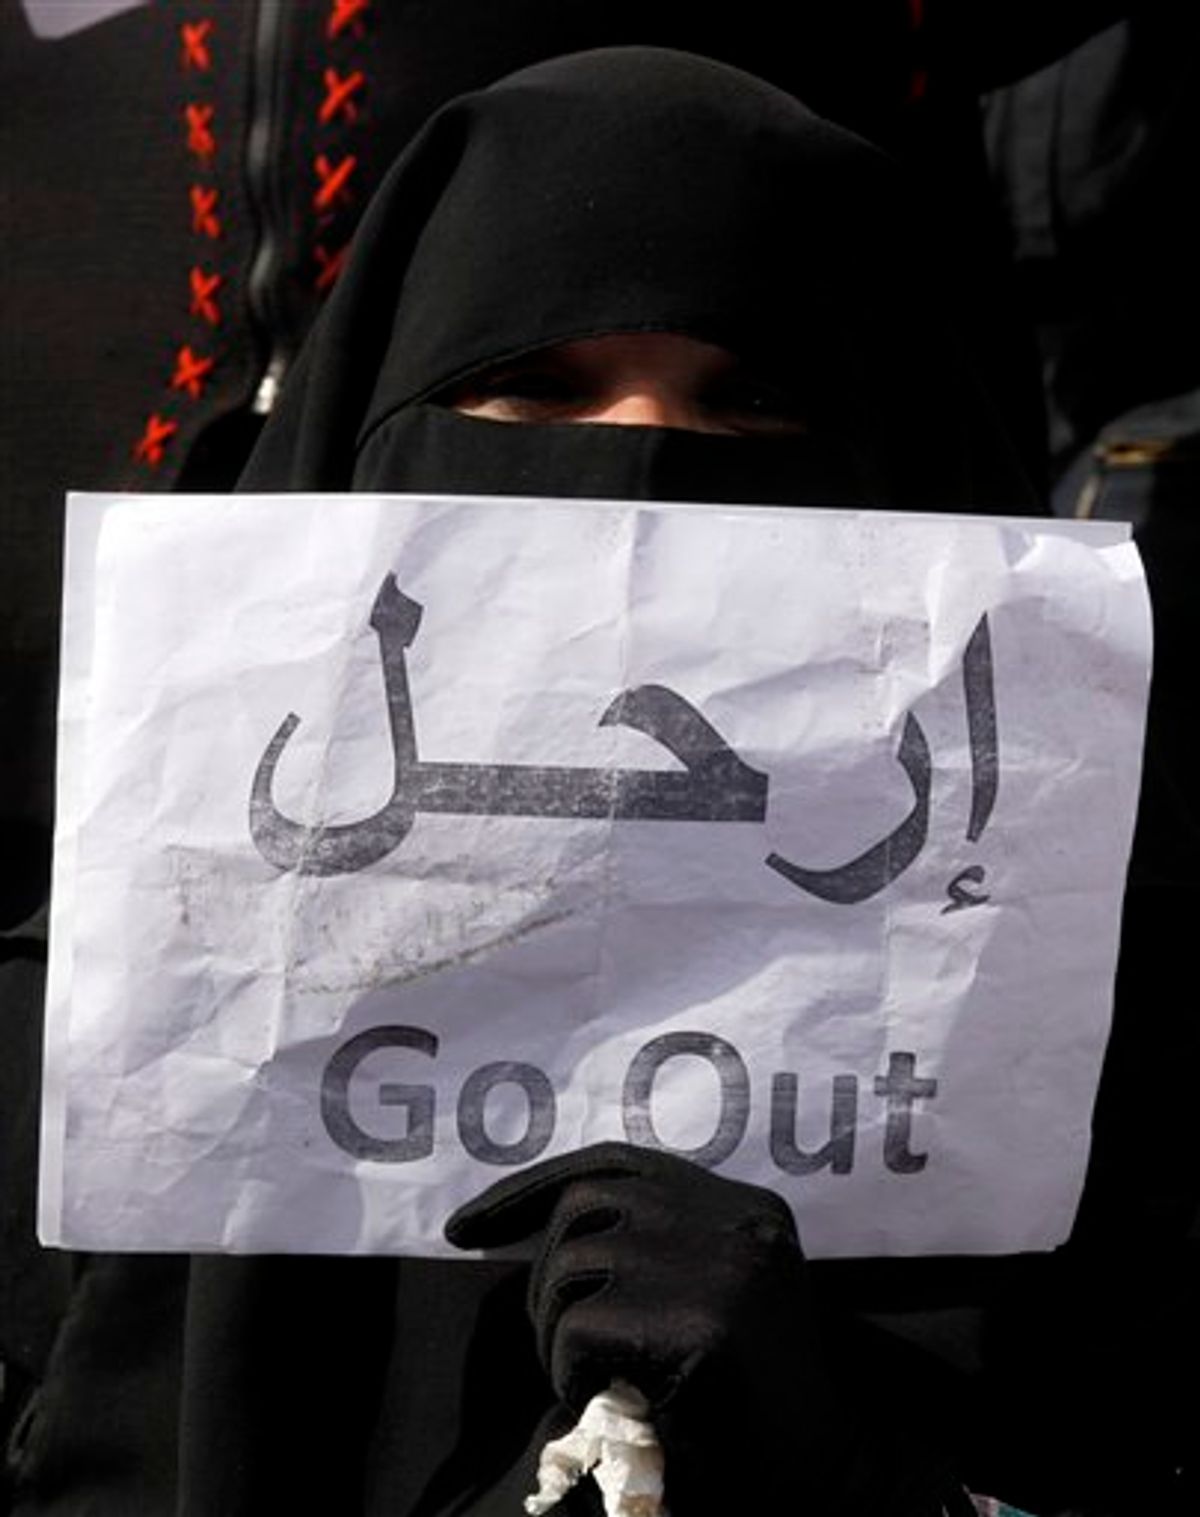 A veiled woman holds a poster calling for President Hosni Mubarak to go, in Tahrir, or Liberation, Square in Cairo, Egypt, Tuesday, Feb. 1, 2011. Tens of thousands of people flooded into the heart of Cairo Tuesday, filling the city's main square as a call for a million protesters was answered by the largest demonstration in a week of unceasing demands for President Hosni Mubarak to leave after nearly 30 years in power. (AP Photo/Victoria Hazou) (AP)